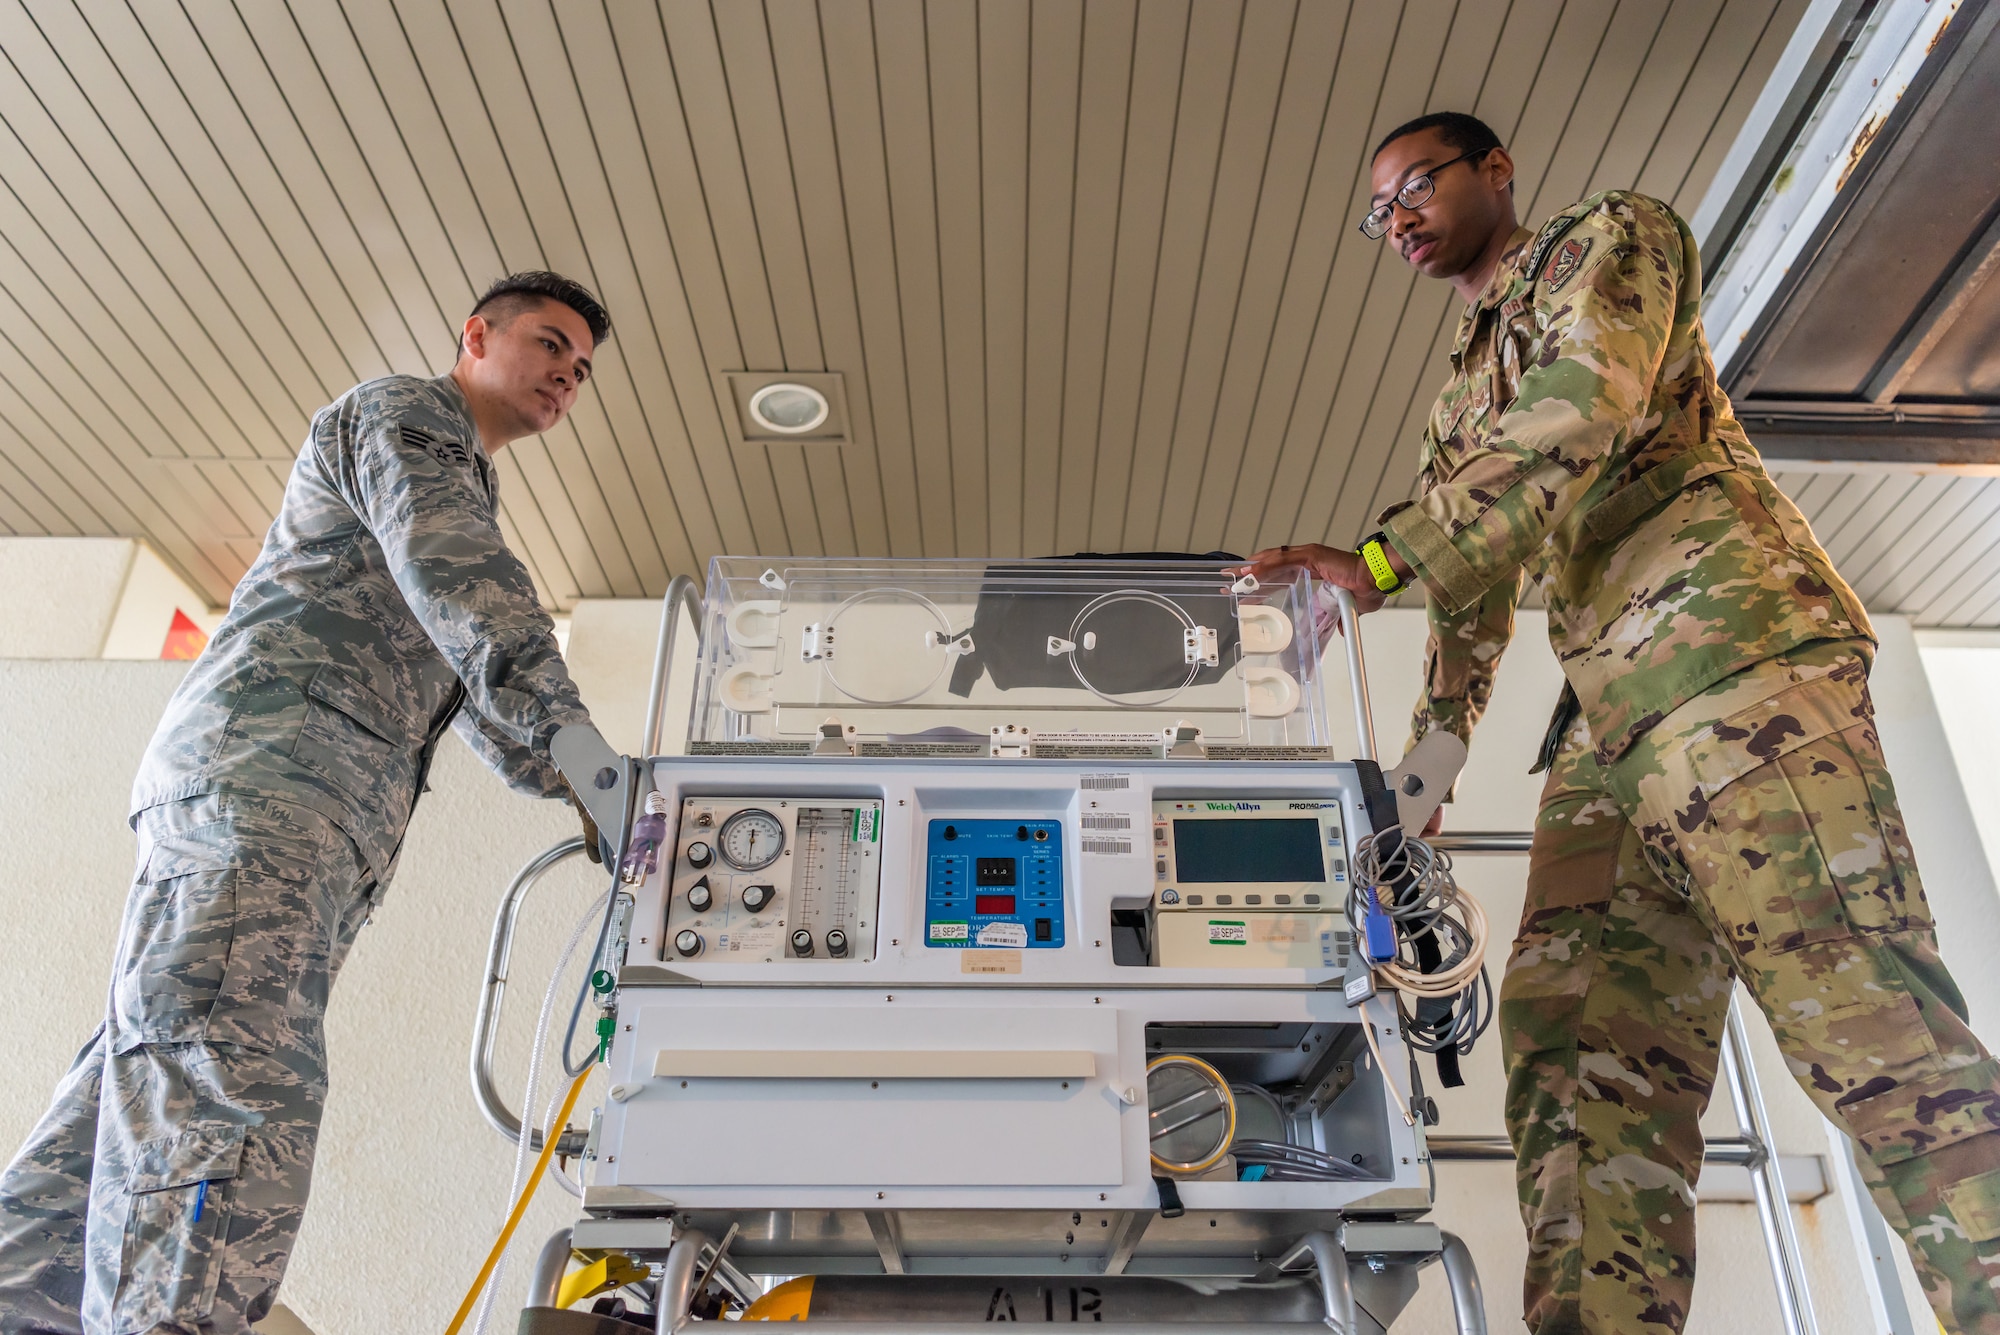 U.S. Air Force Staff Sgt. Derrik Pitchford, Critical Care Air Transport respiratory technician assigned to the 18th Aerospace Medicine Squadron, loads the neonatal transport system with Airman 1st Class Eliseo Rios, 18th AMDS aerospace medical technician, during a Neonatal Intensive Care Unit transportation course June 5, 2019, on Camp Foster, Japan. The 18th AMDS briefed the NICU nurses and technicians over the responsibilities of infant patient transportation on the ground, while the 18th AES focused on transportation while on the air. (U.S. Air Force photo by Airman 1st Class Cynthia Belío)